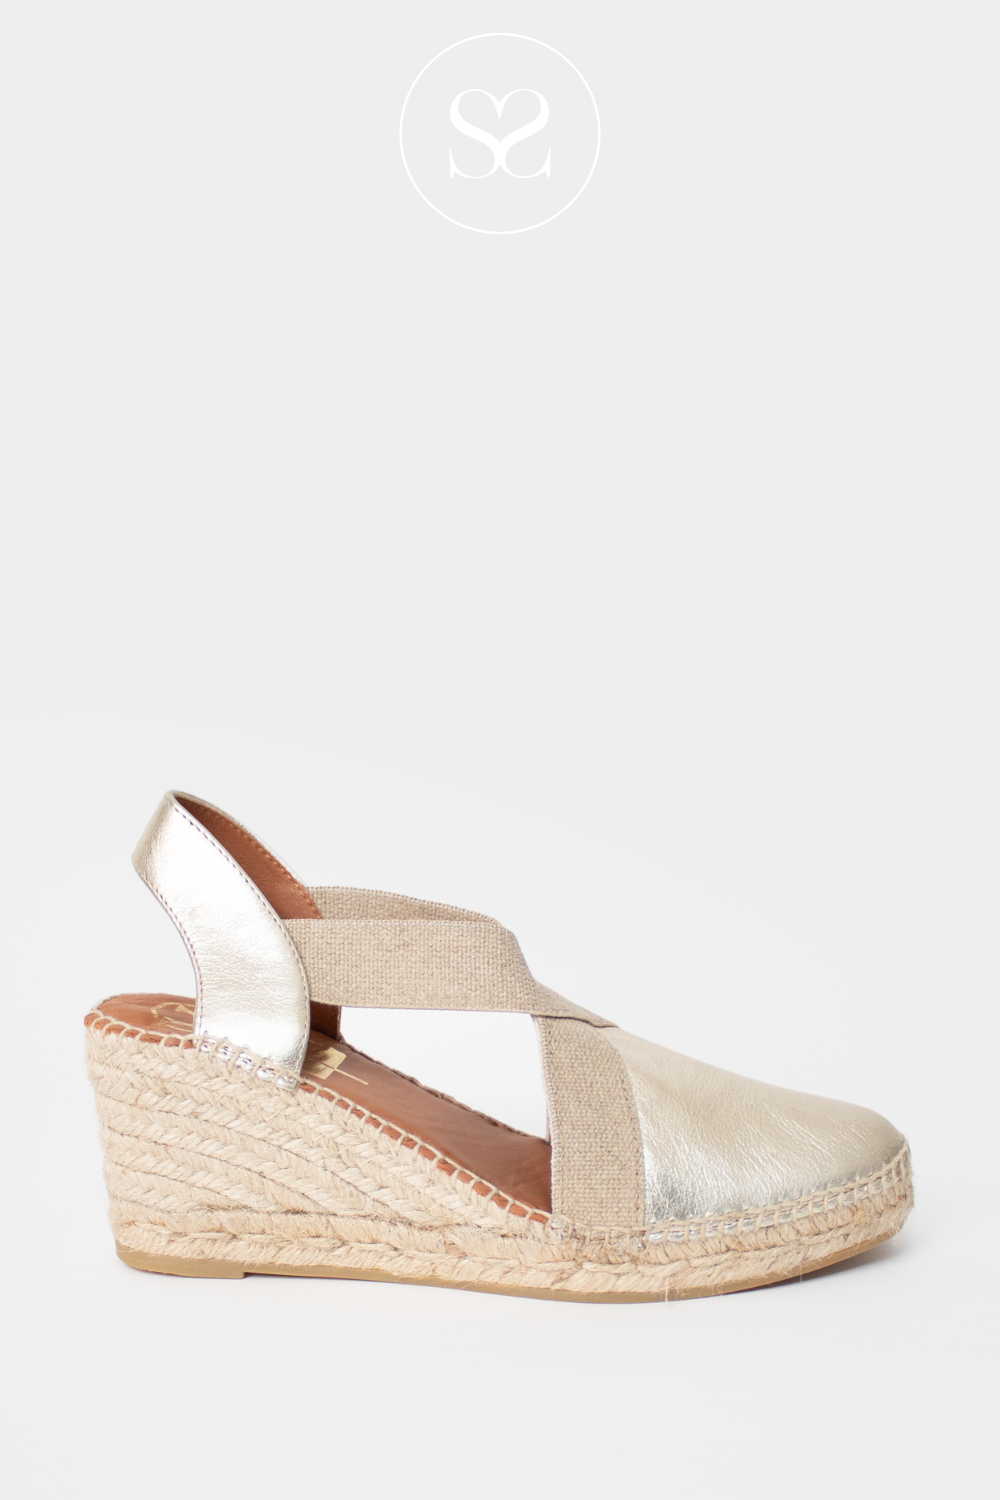 VIGUERA GOLD WEDGE ESPADRILLE SHOES. CLOSED TOE FRONT AND EXPOSED HEEL. SLIP ON SHOE WITH ELASTICATED CROSS FRONT. 